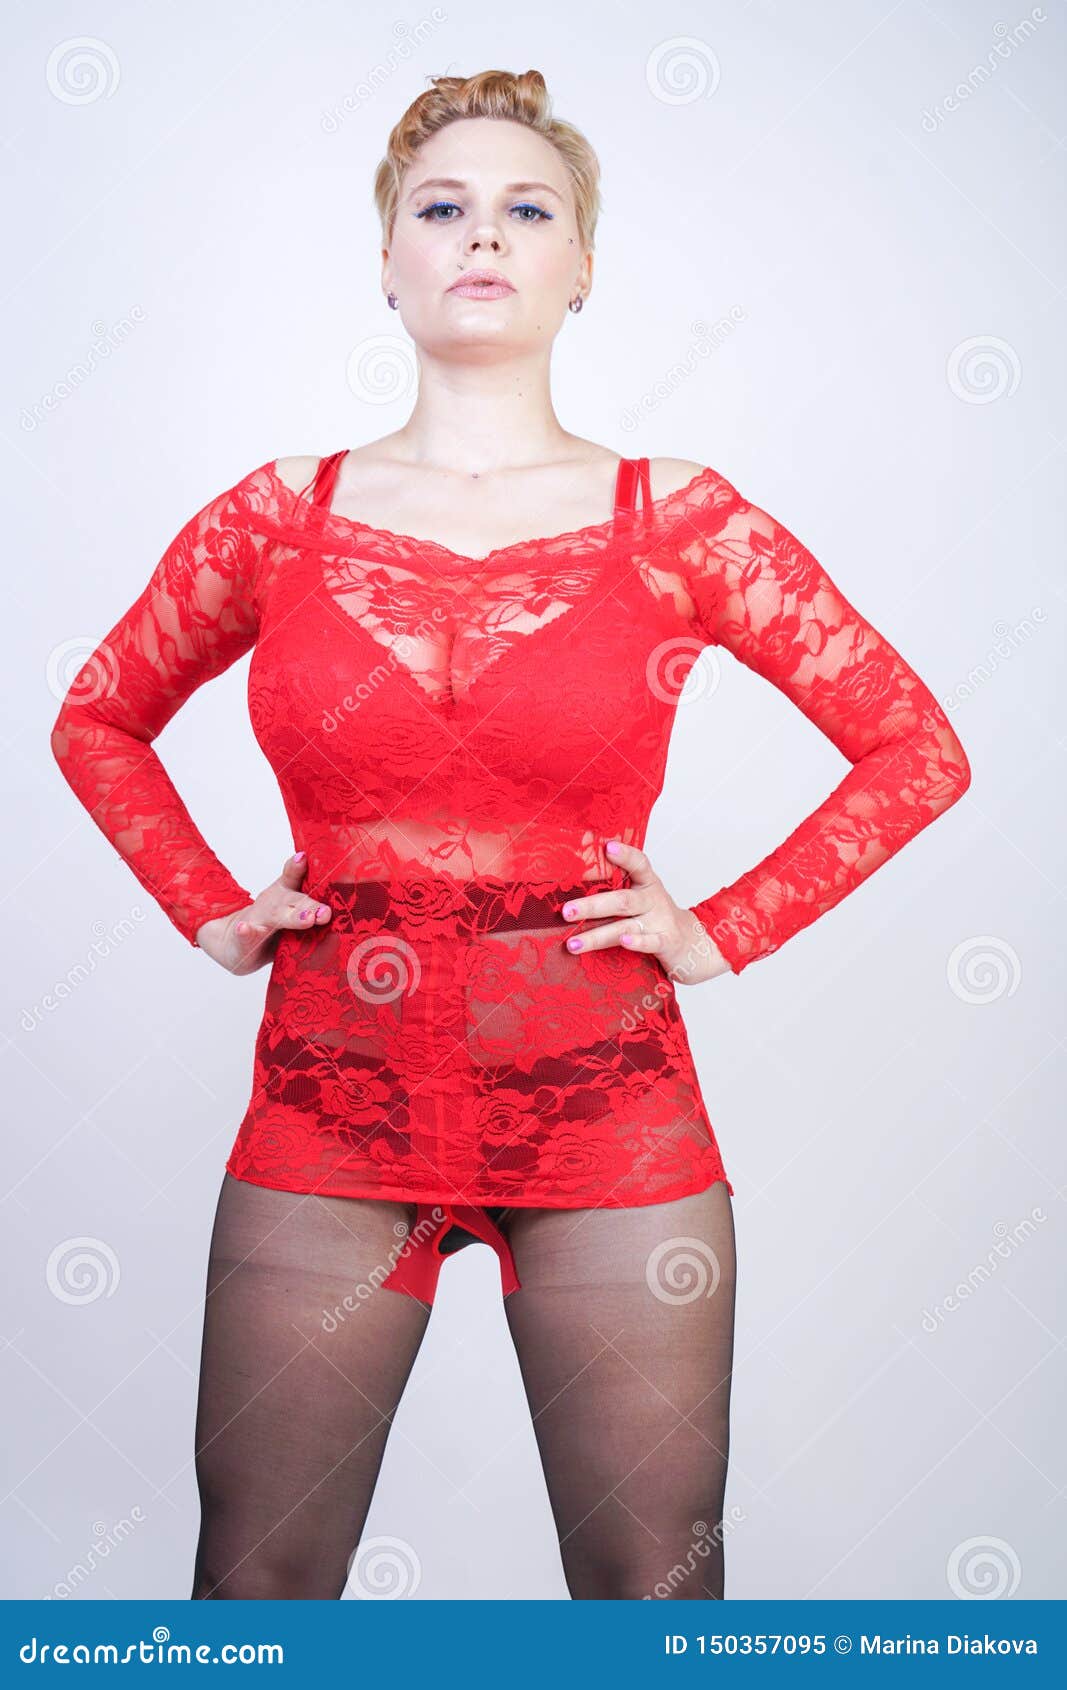 119 Chubby Tights Stock Photos, Images & Pictures